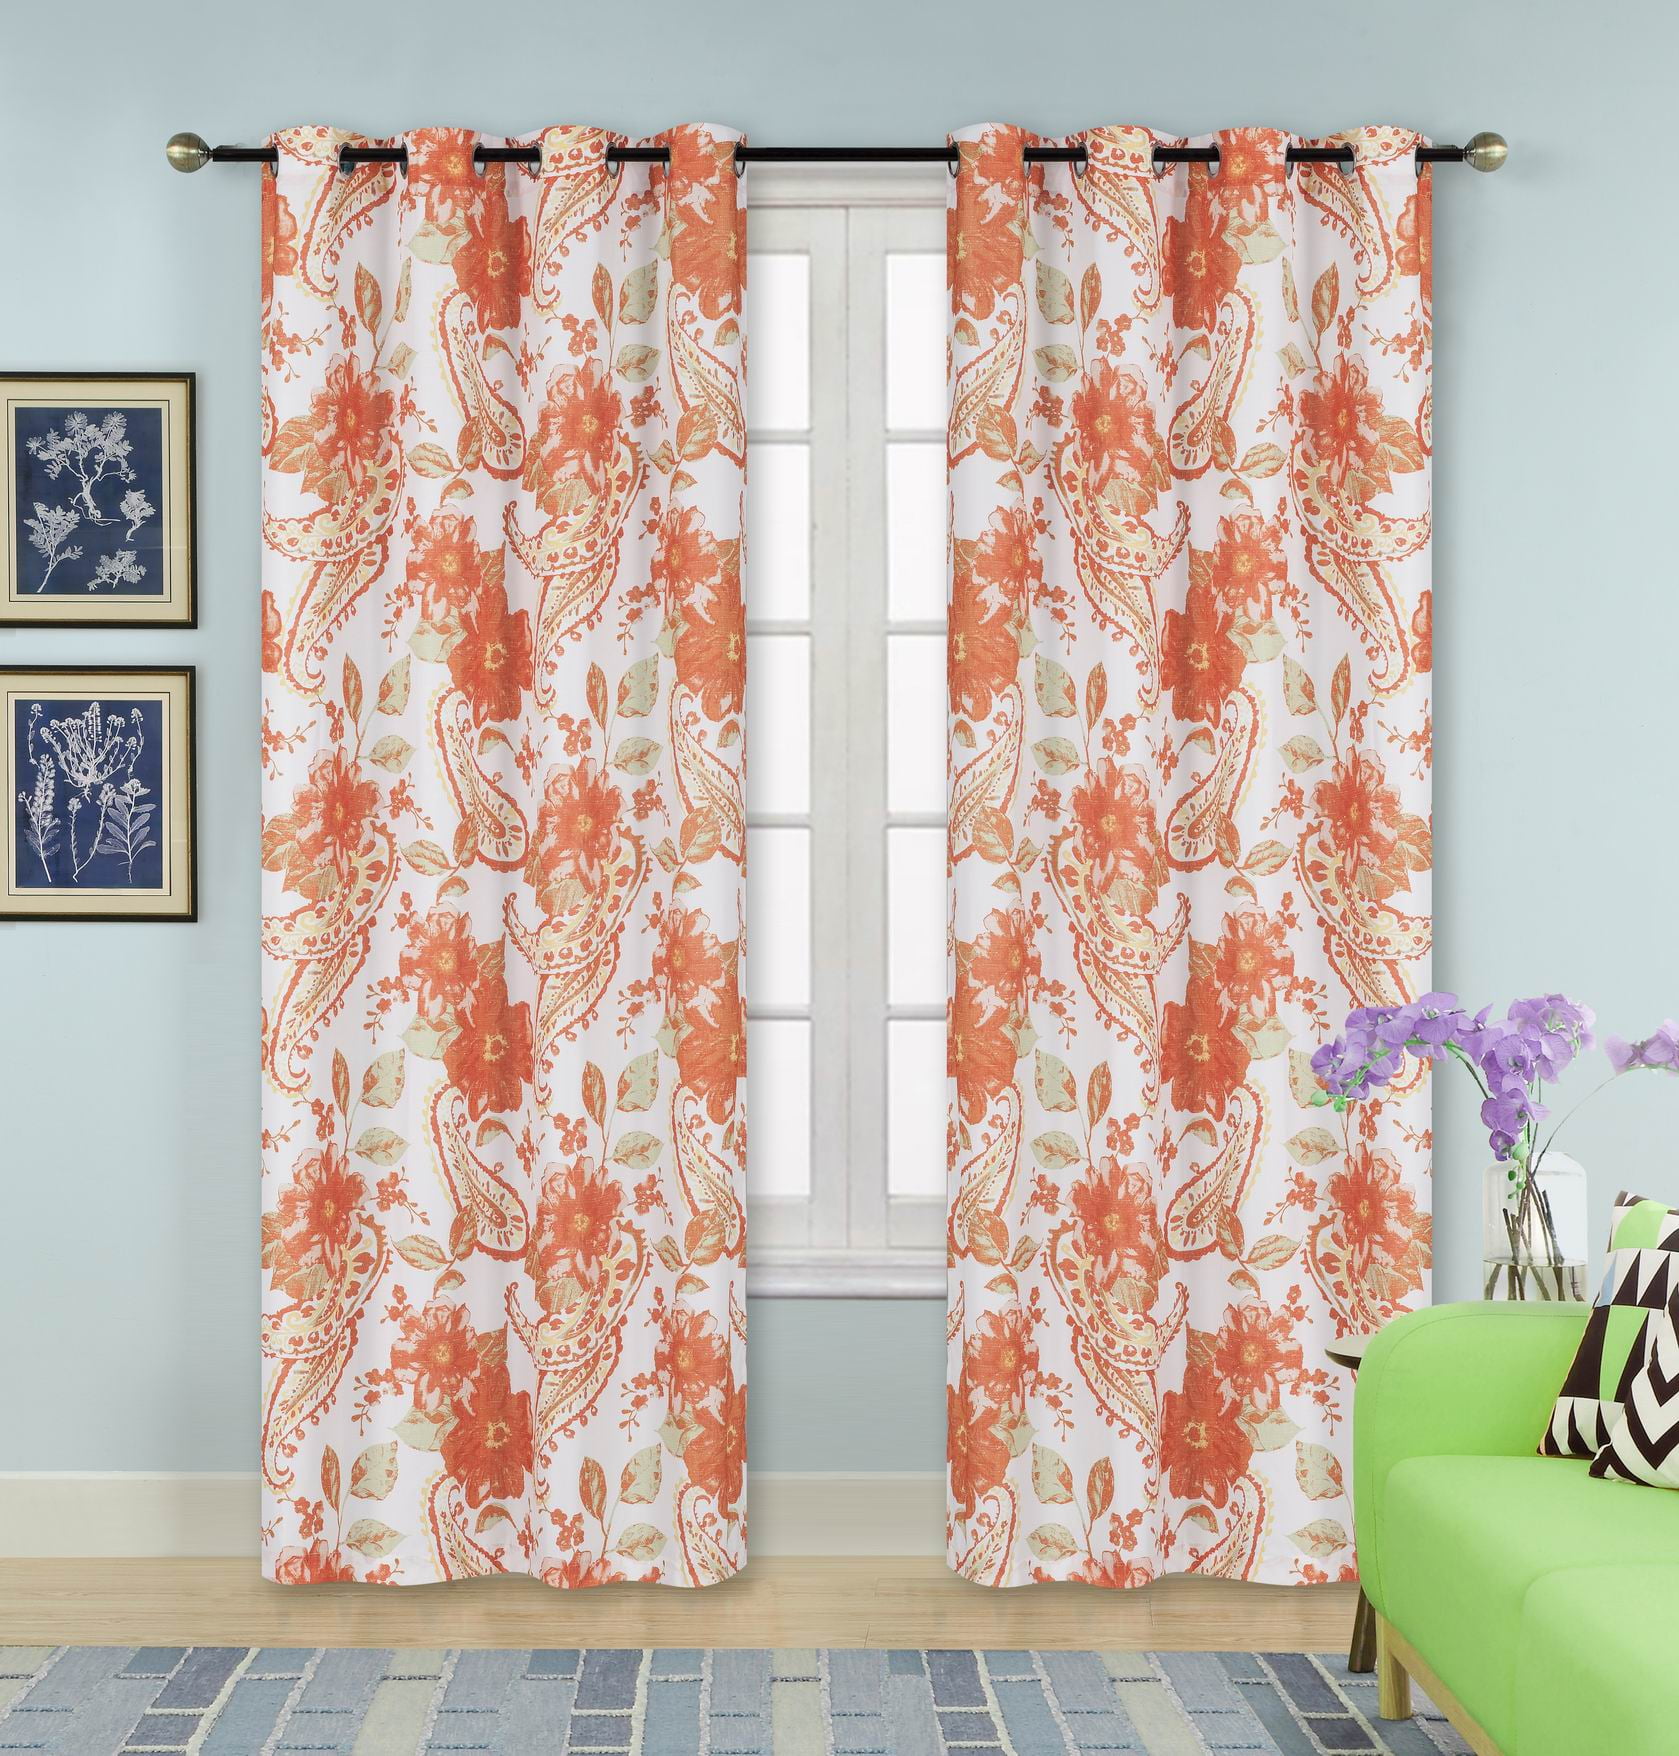 2pc 3D Digitial Printing Curtain Panels Floral/Animals Sheers Window Curtain